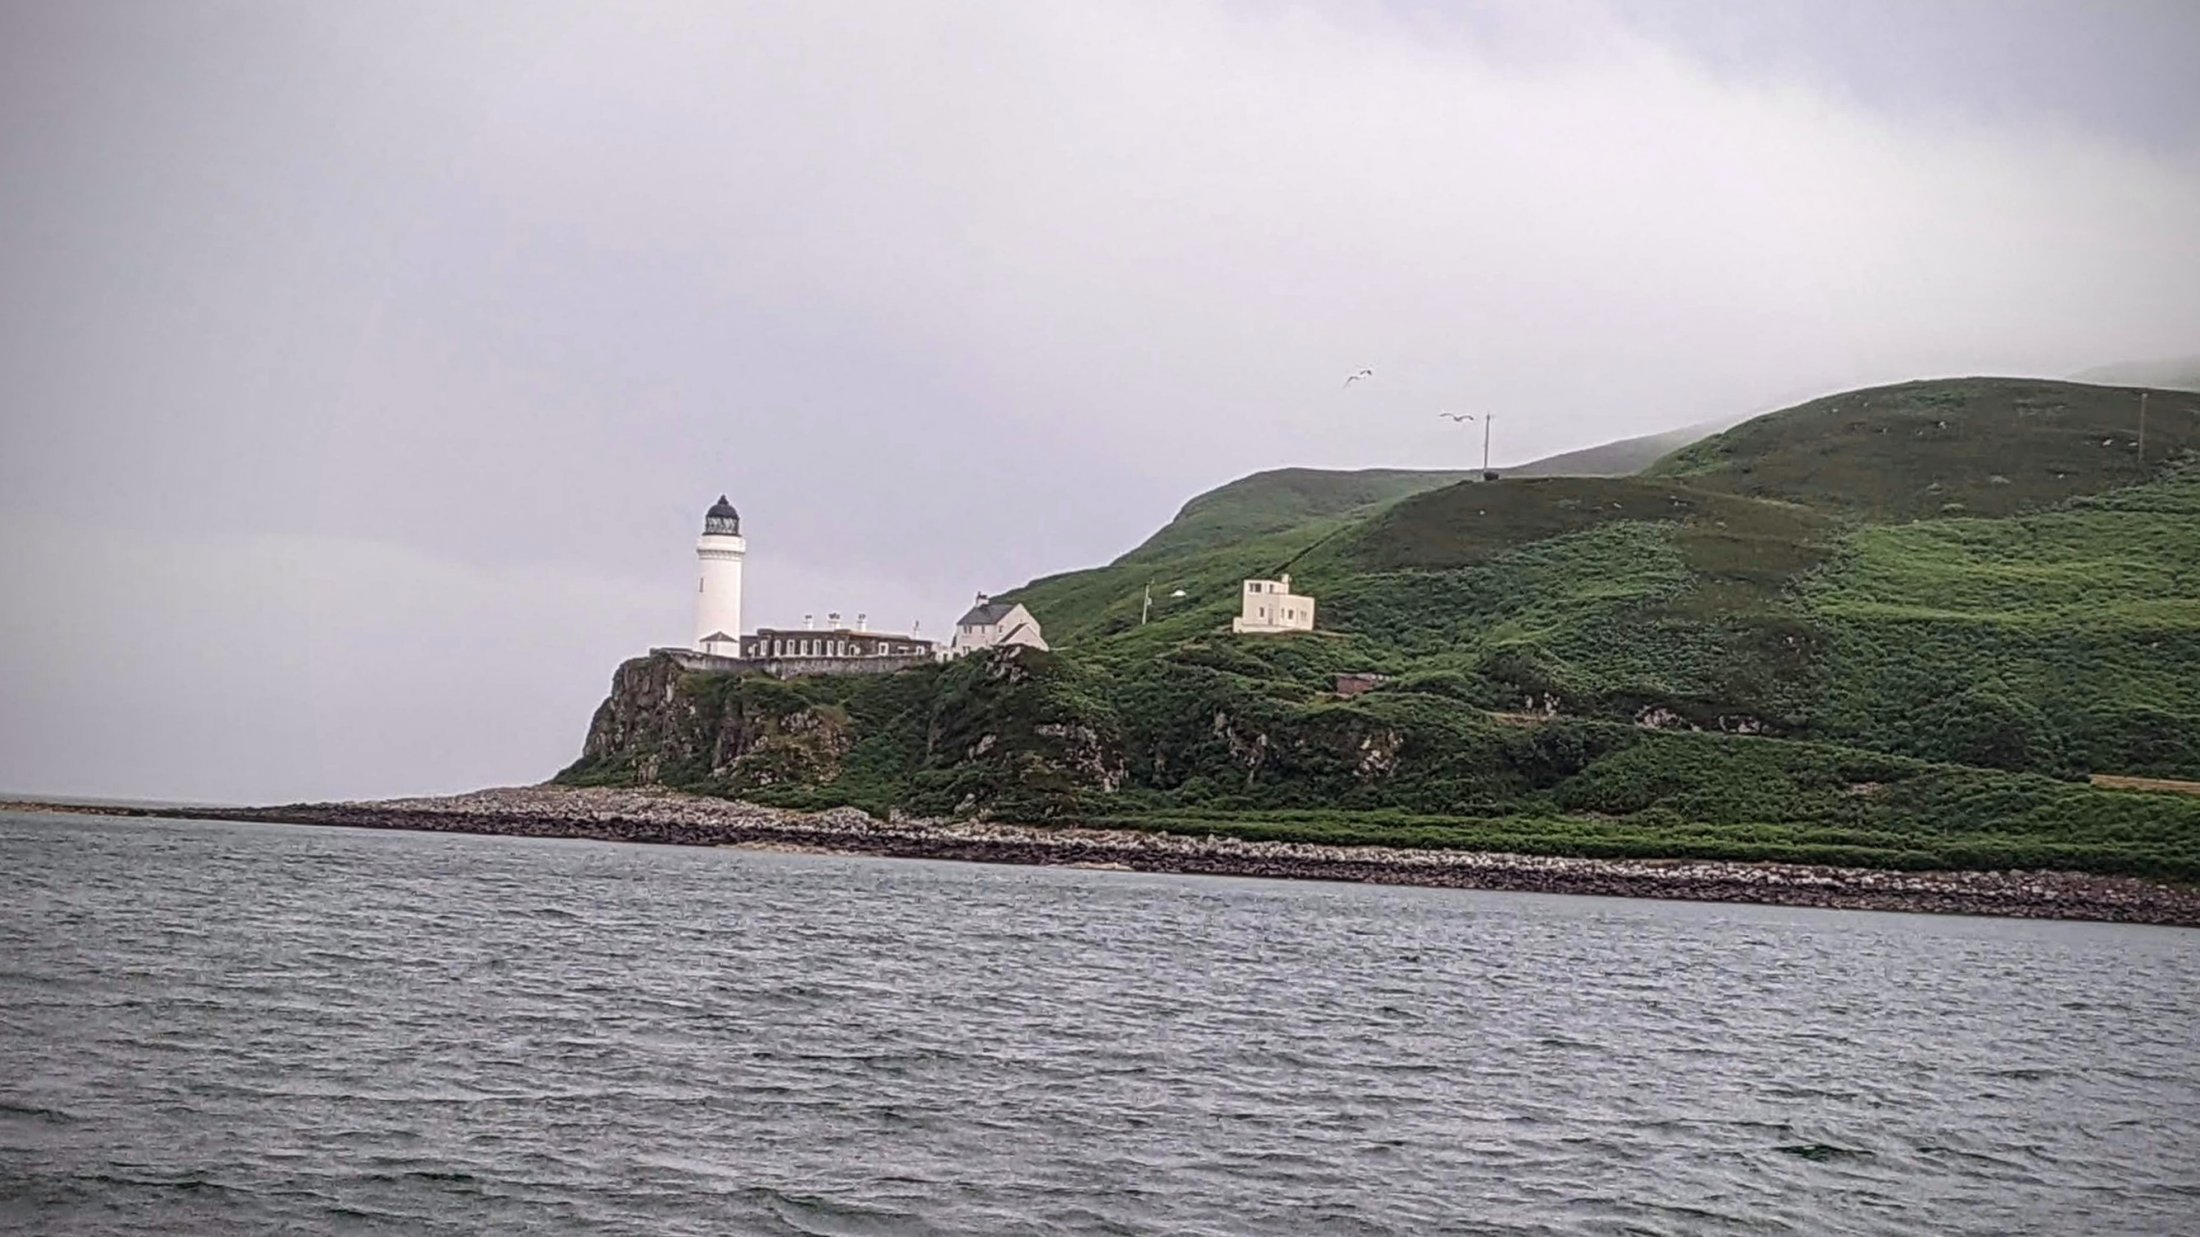 Leaving Campbeltown (Davaar Island and lighthouse)